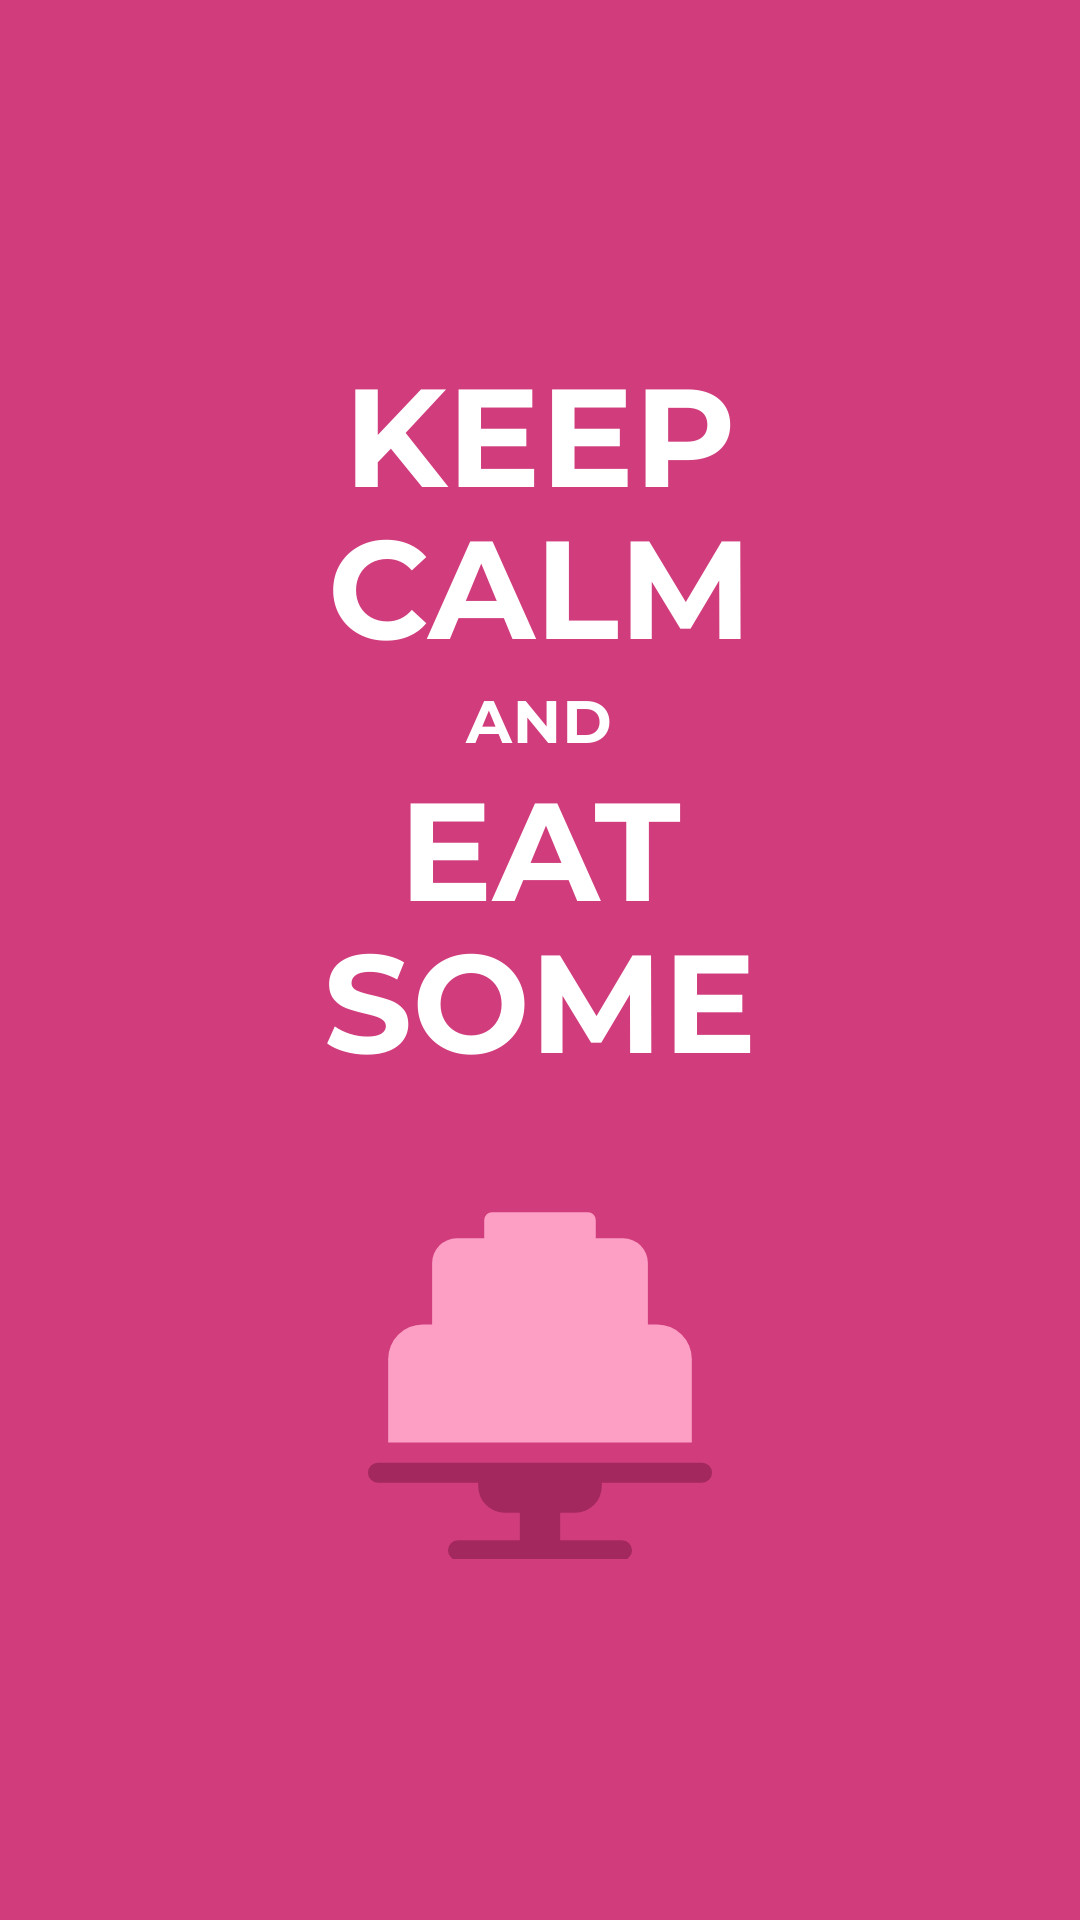 Keep Calm and Eat Some Cake Facebook Sponsored Message 1200x628